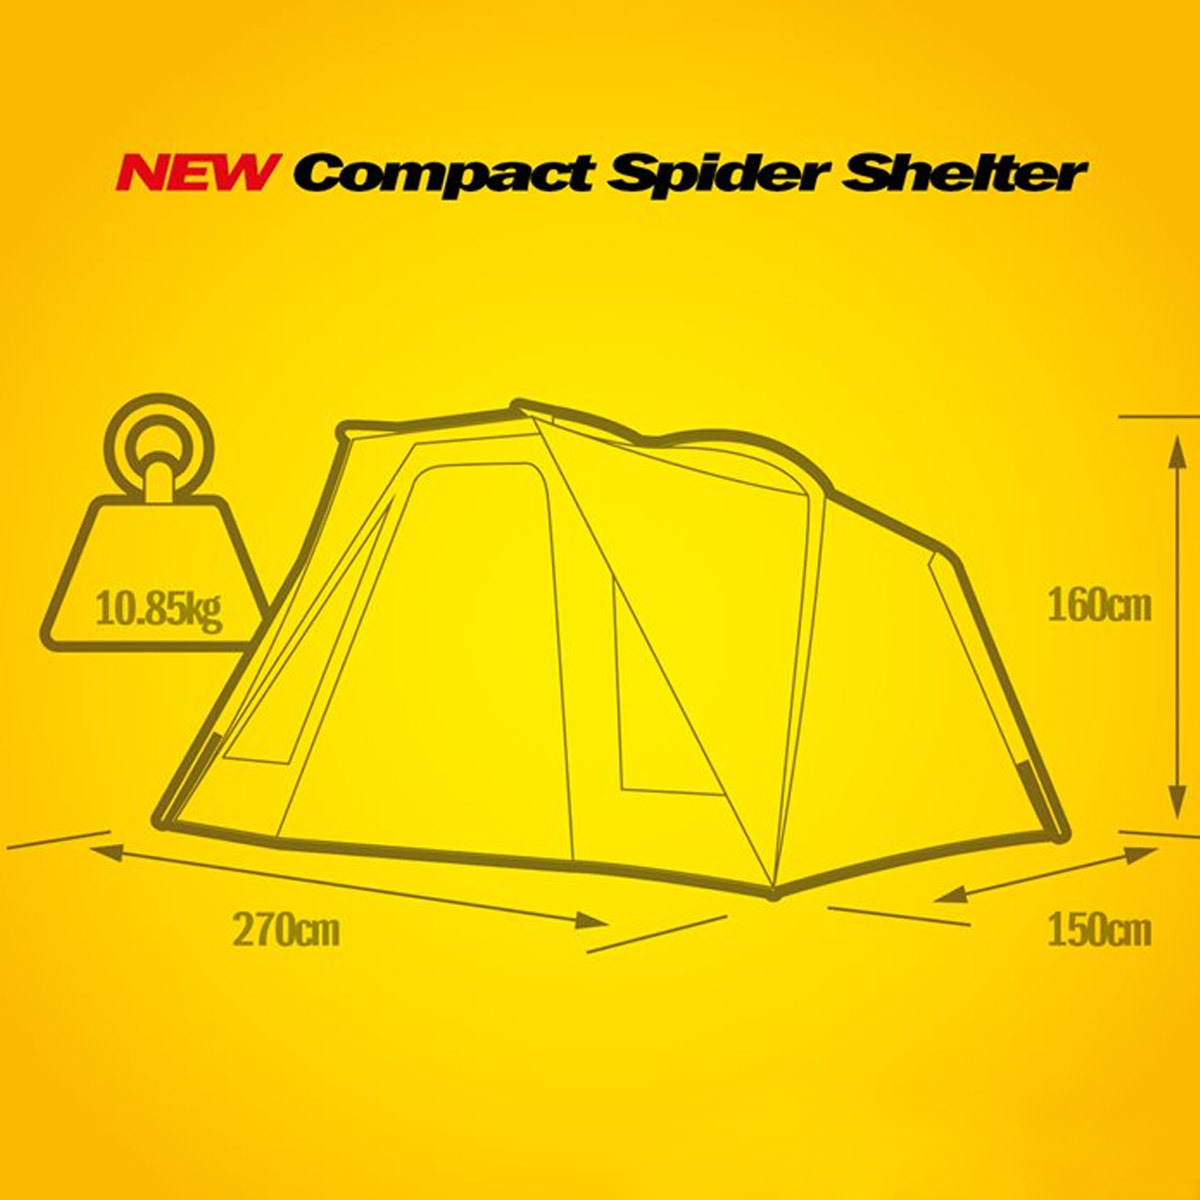 Solar SP Compact Spider Shelter 